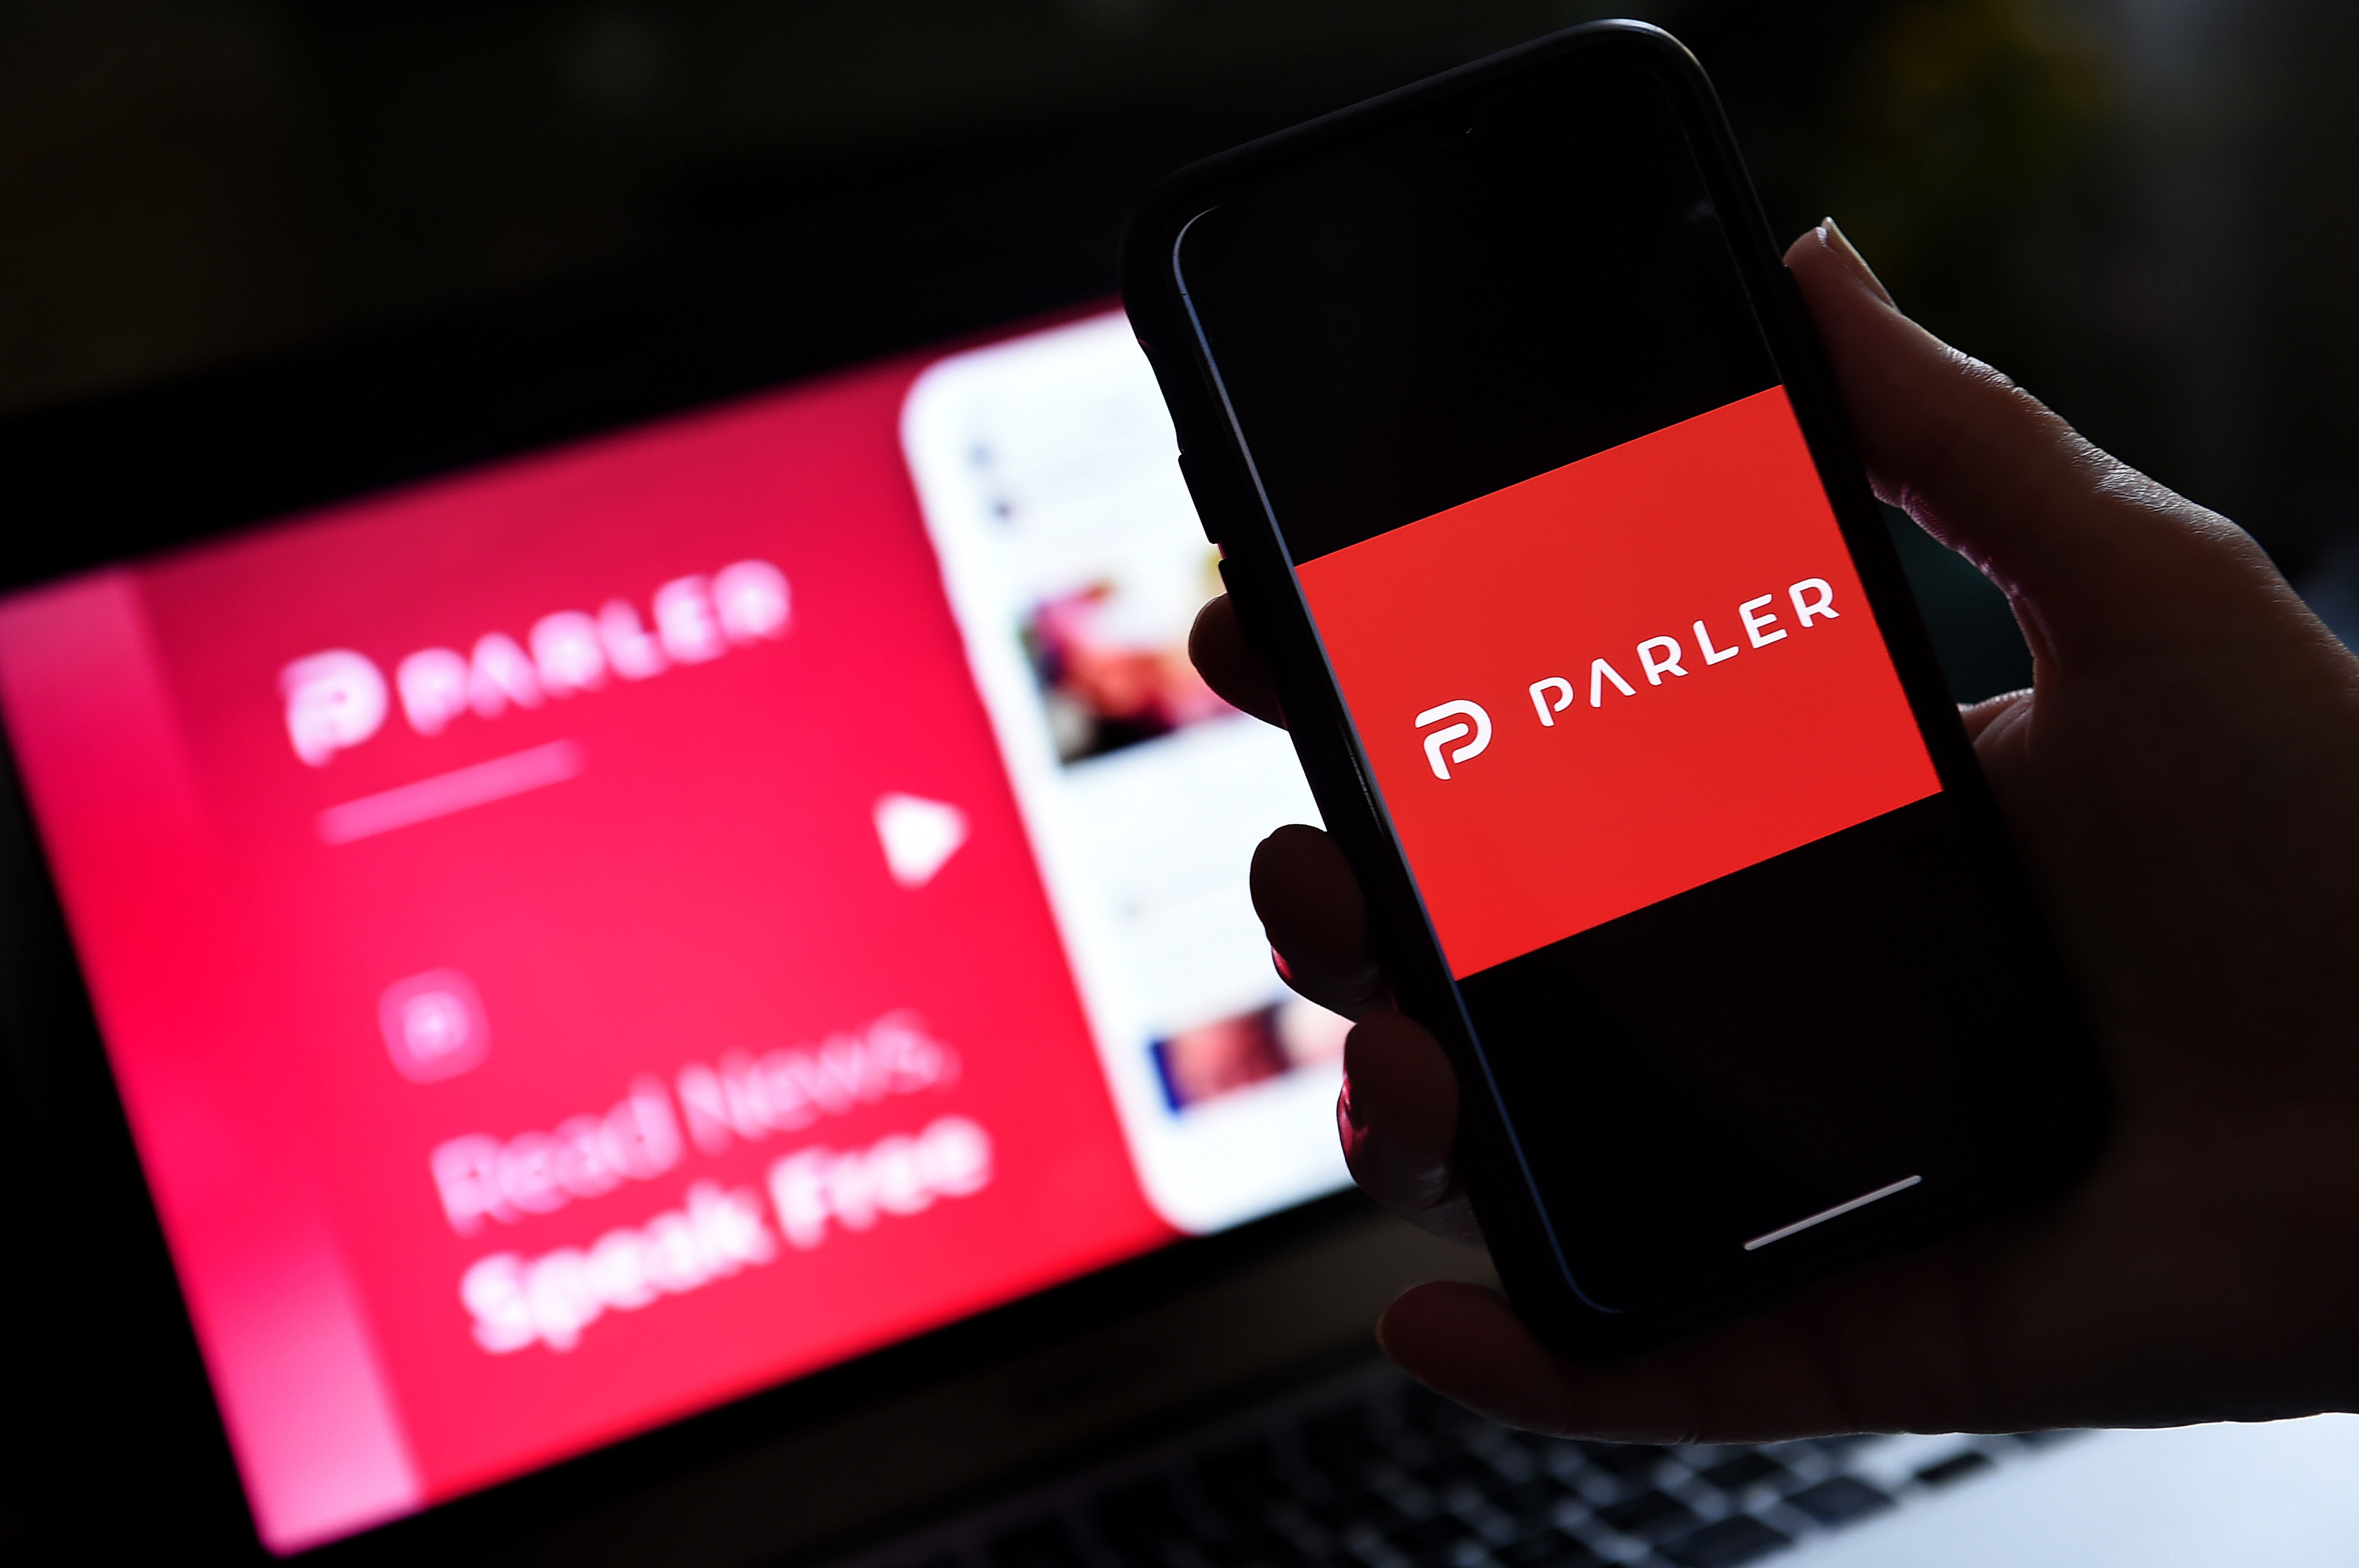 Media application logo from Parler displayed on a smartphone with its website in the background. Credit: AFP Photo